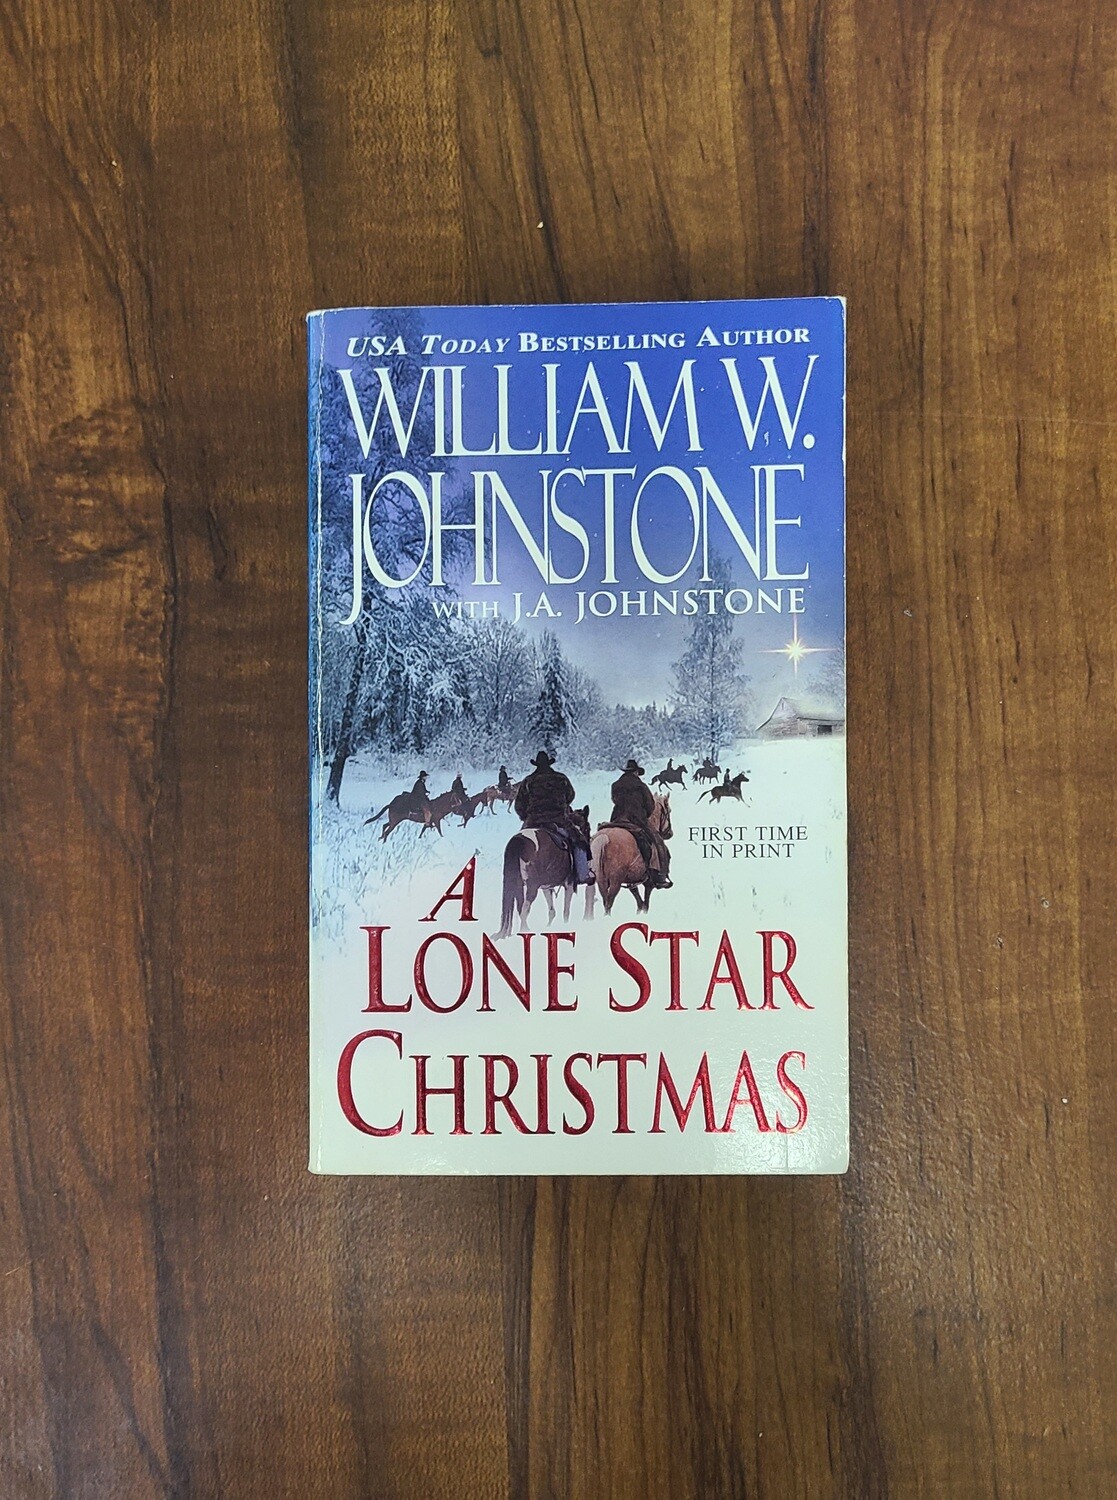 A Lone Star Christmas by William W. Johnstone with J.A. Johnstone